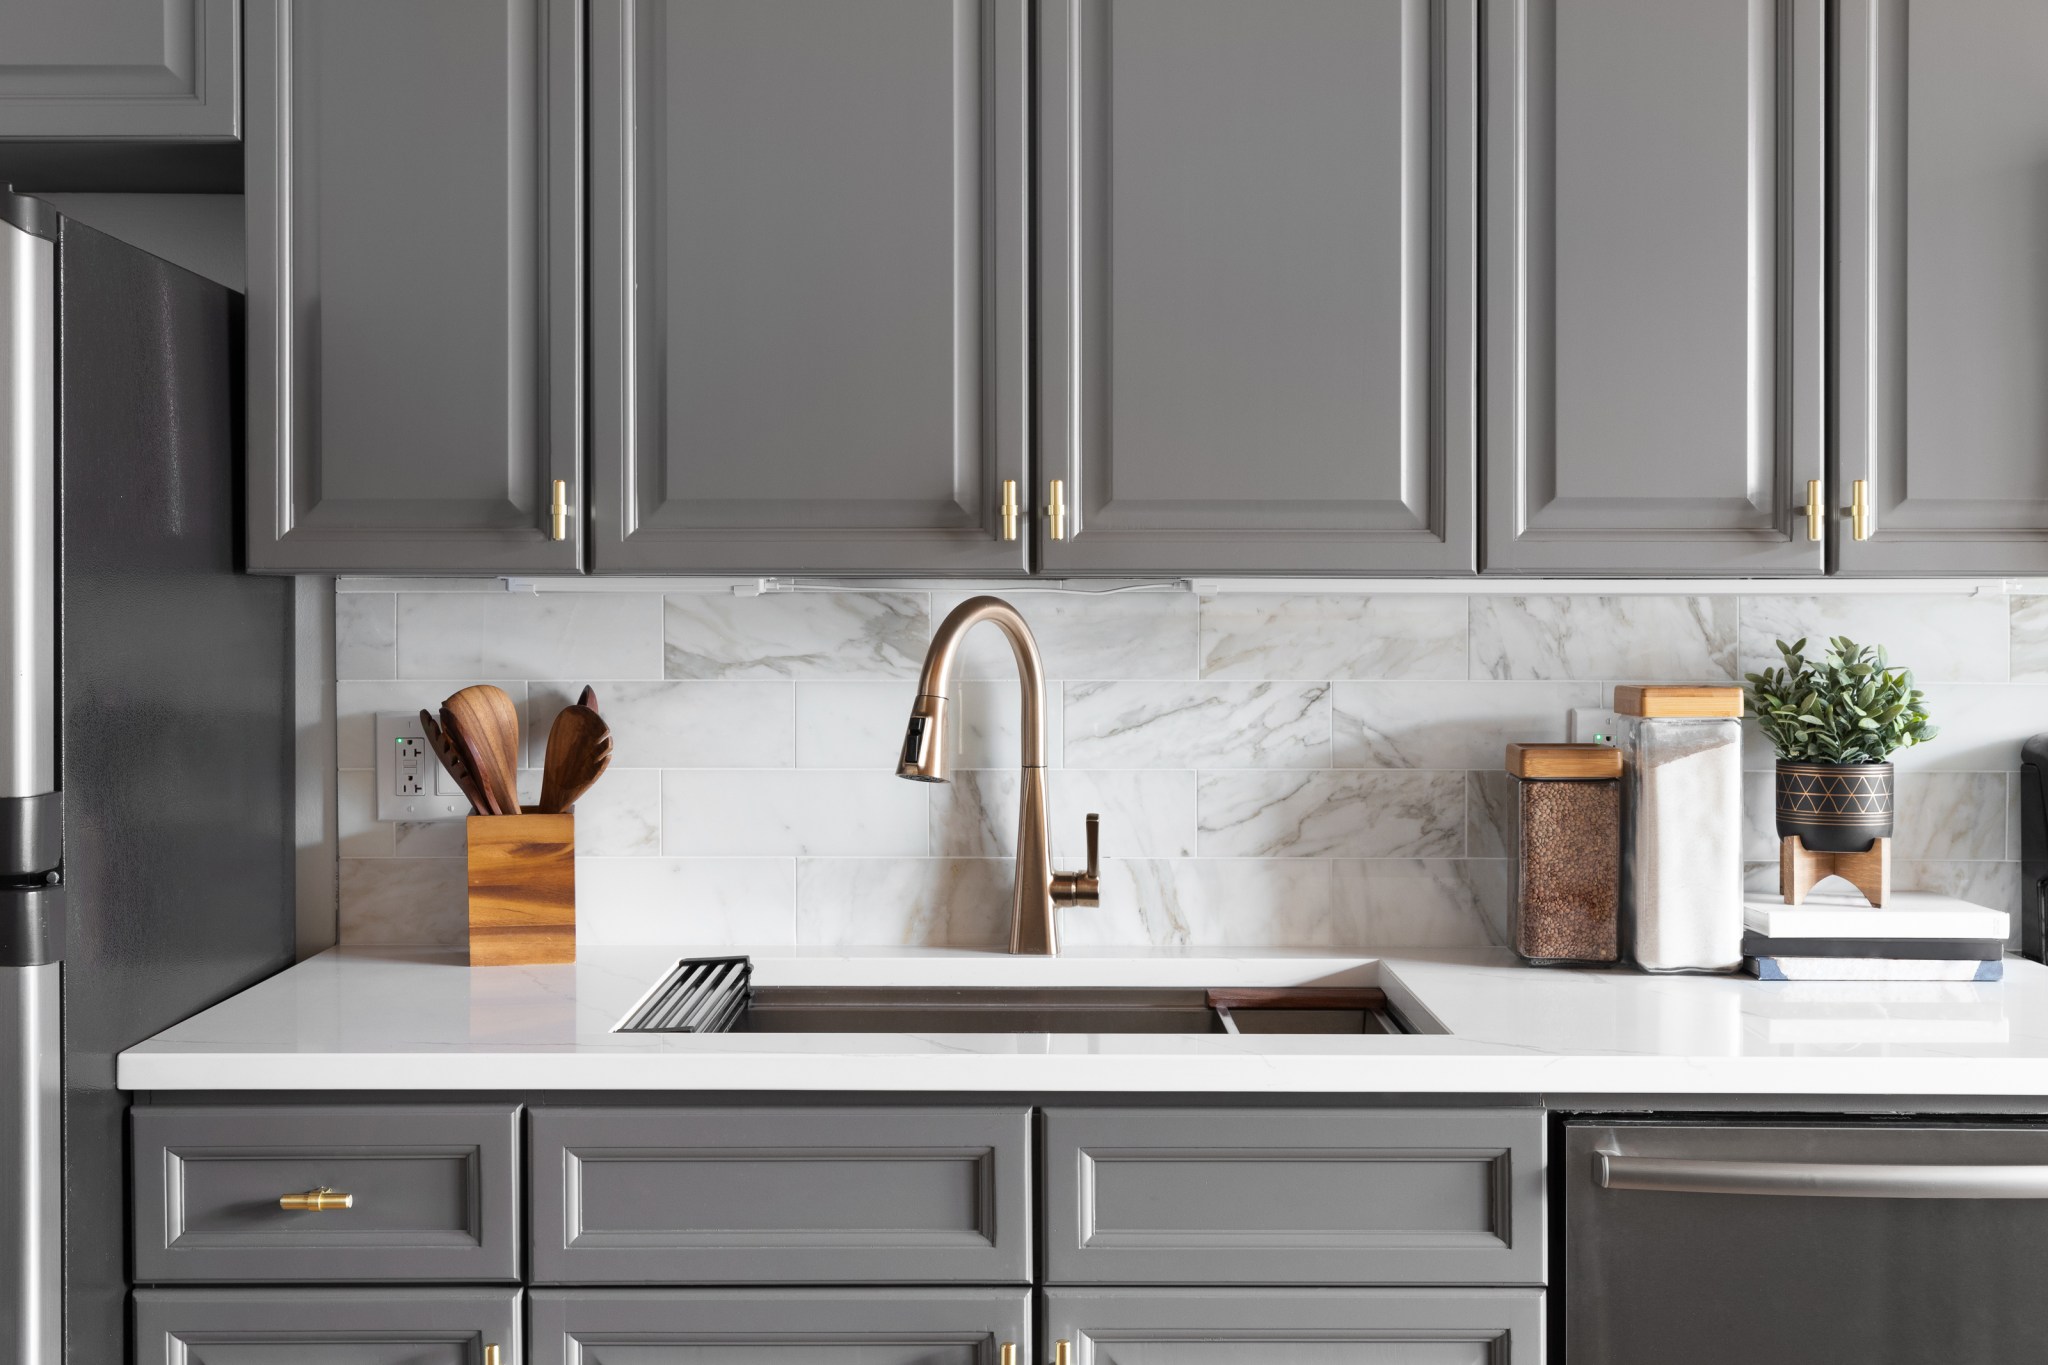 A remodeled kitchen sink detailed with grey cabinets, a white marble countertop and backsplash, and decorations.